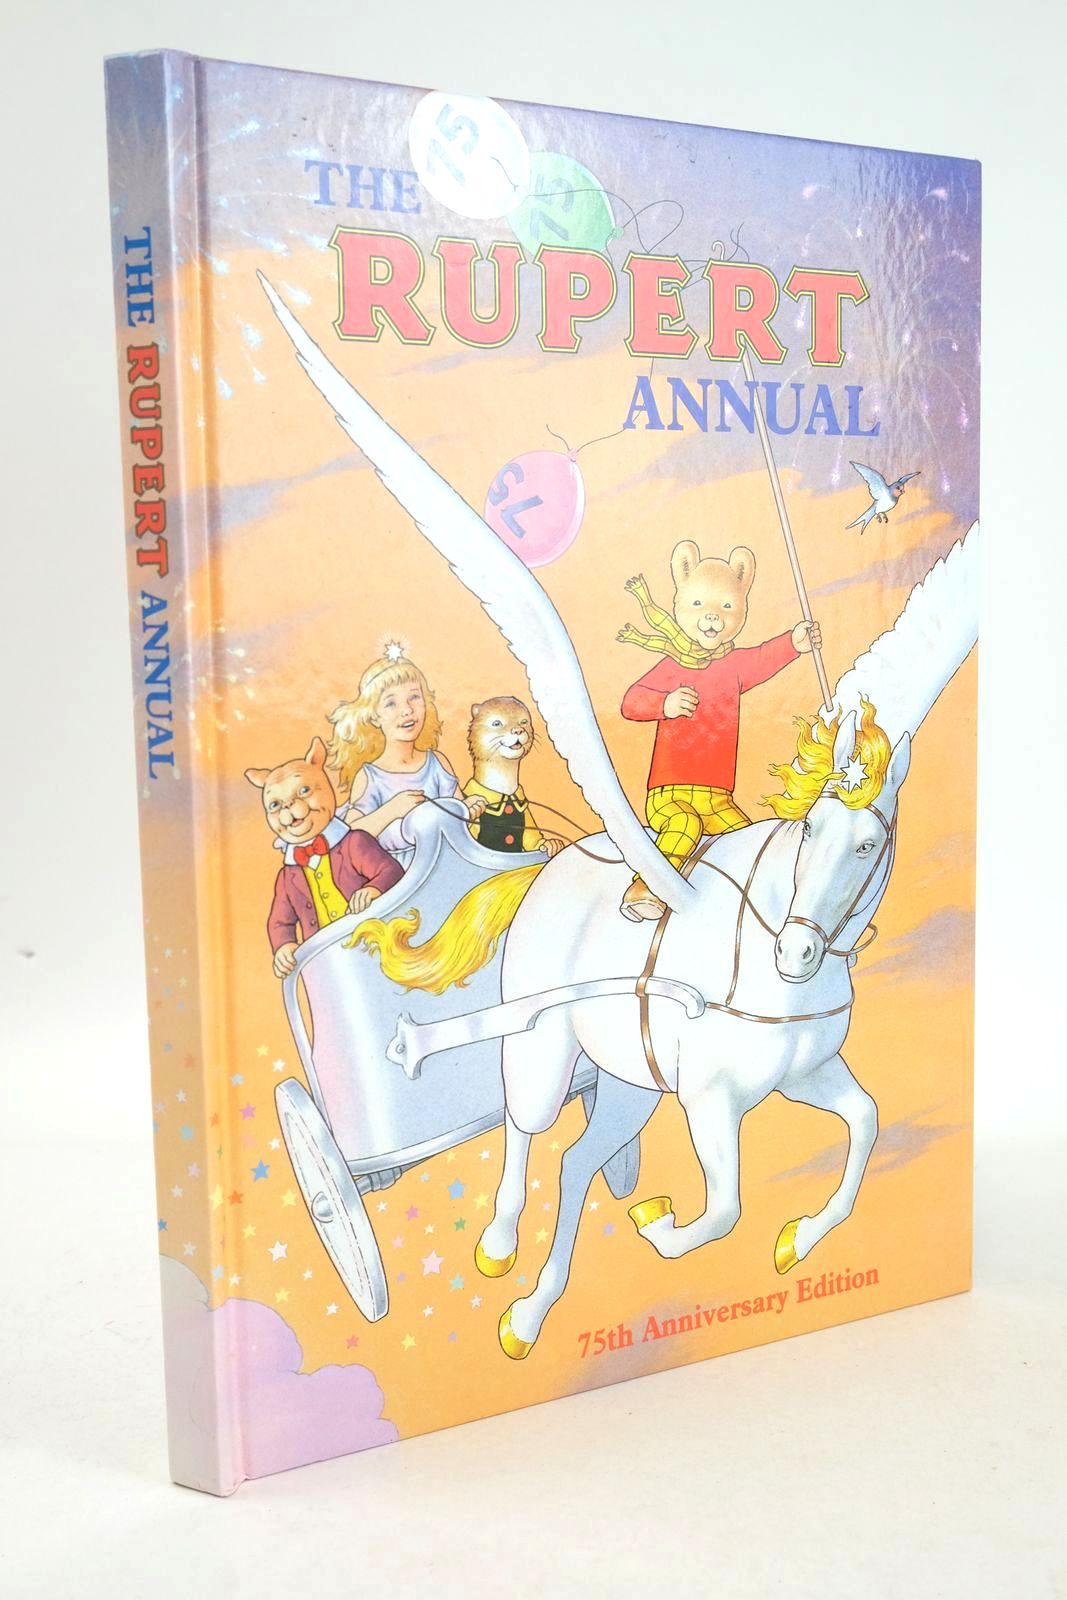 Photo of RUPERT ANNUAL 1995 written by Robinson, Ian illustrated by Harrold, John published by Pedigree Books Limited (STOCK CODE: 1326014)  for sale by Stella & Rose's Books